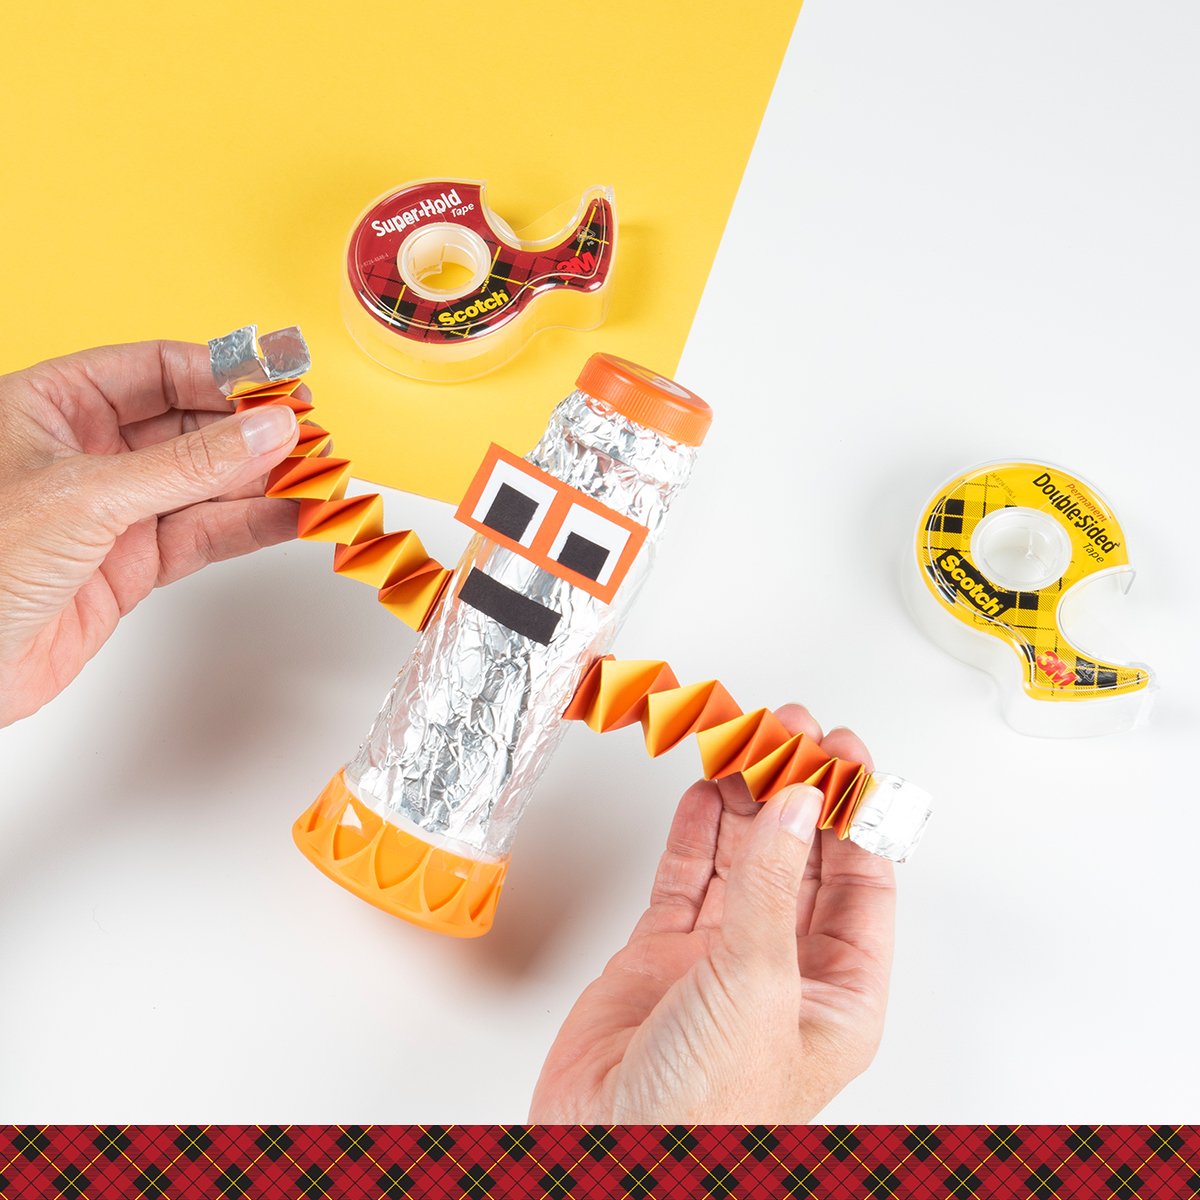 Help your kids celebrate National STEM Day with this DIY recycled robot that combines creativity, ingenuity, and fun all in one.🤖 #NationalSTEMDay #ScotchBrand #Creativity